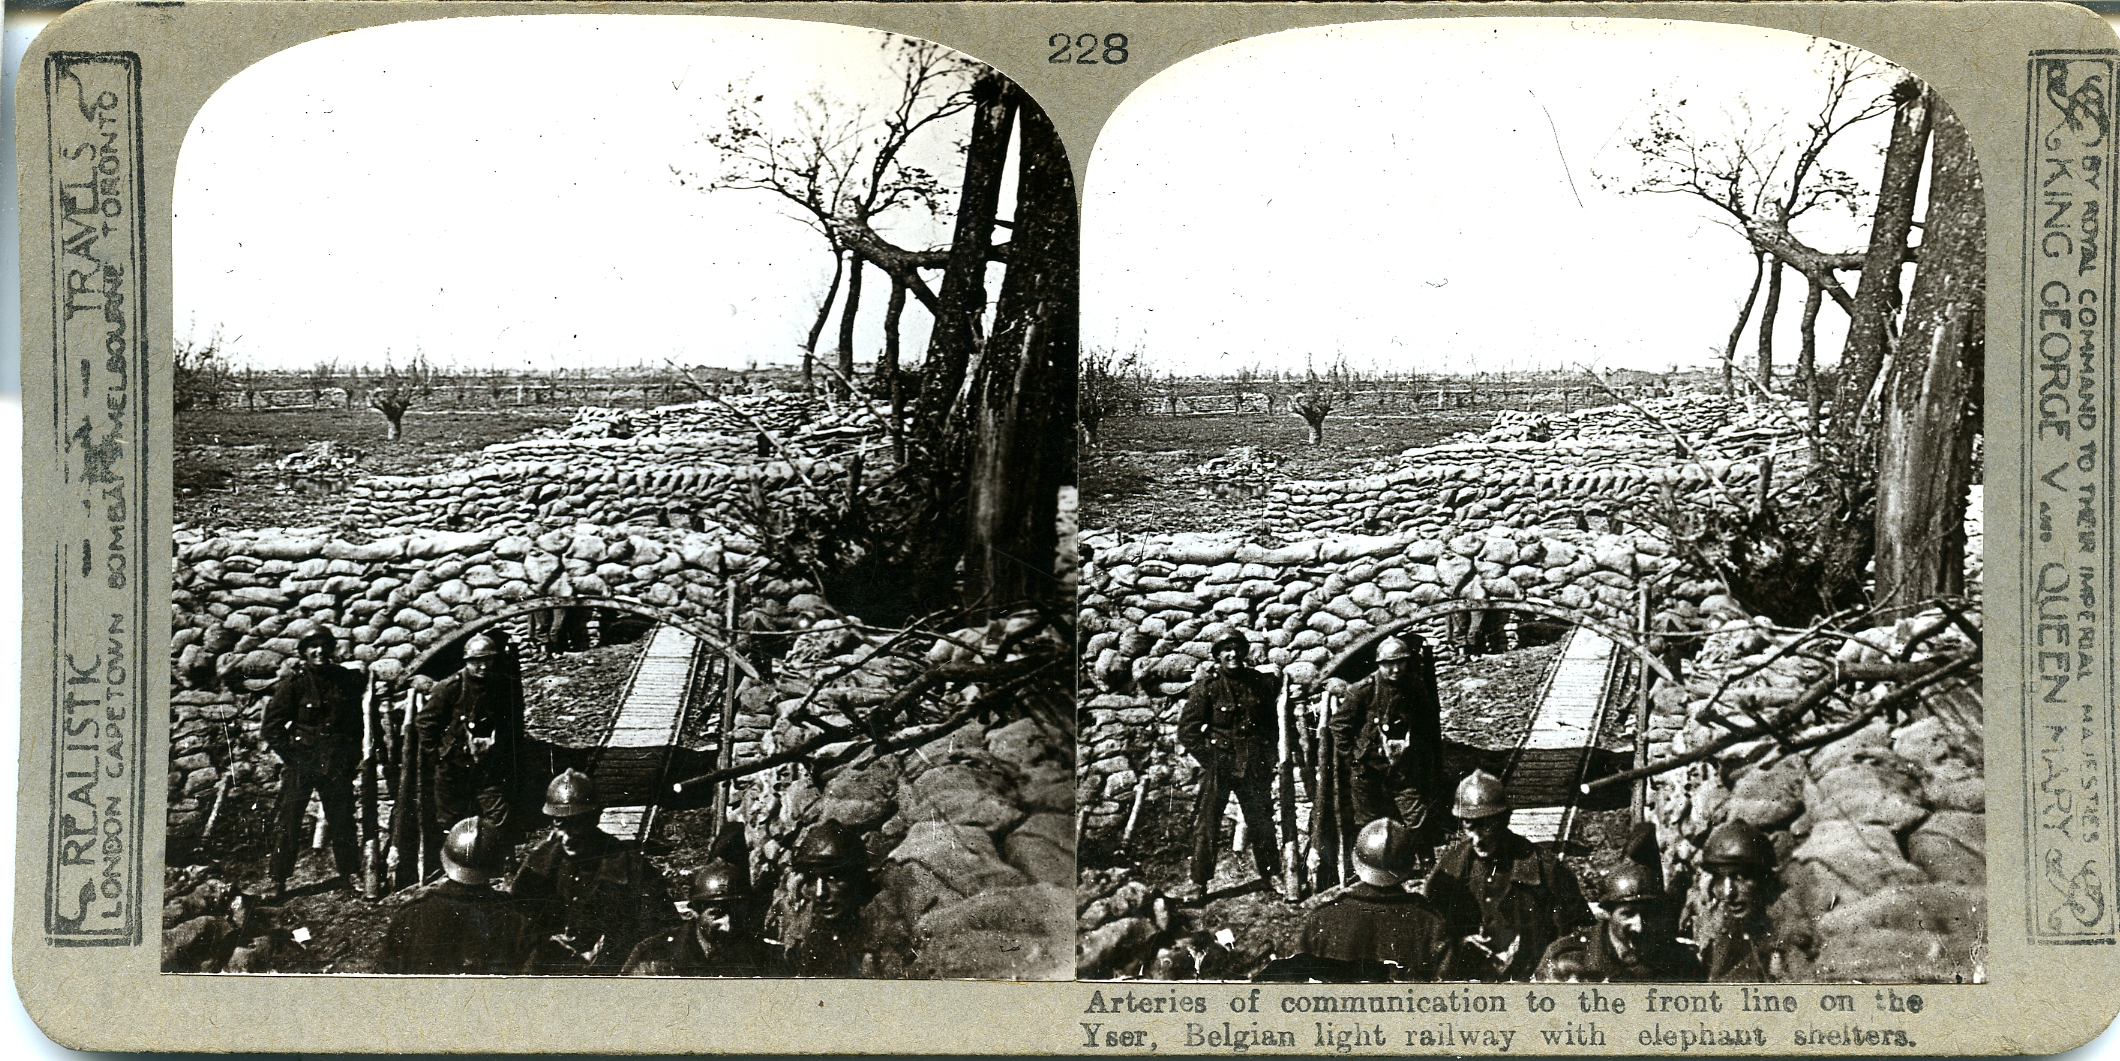 Arteries of communication to the front line on the Yser, Belgian light railway with elephant shelters